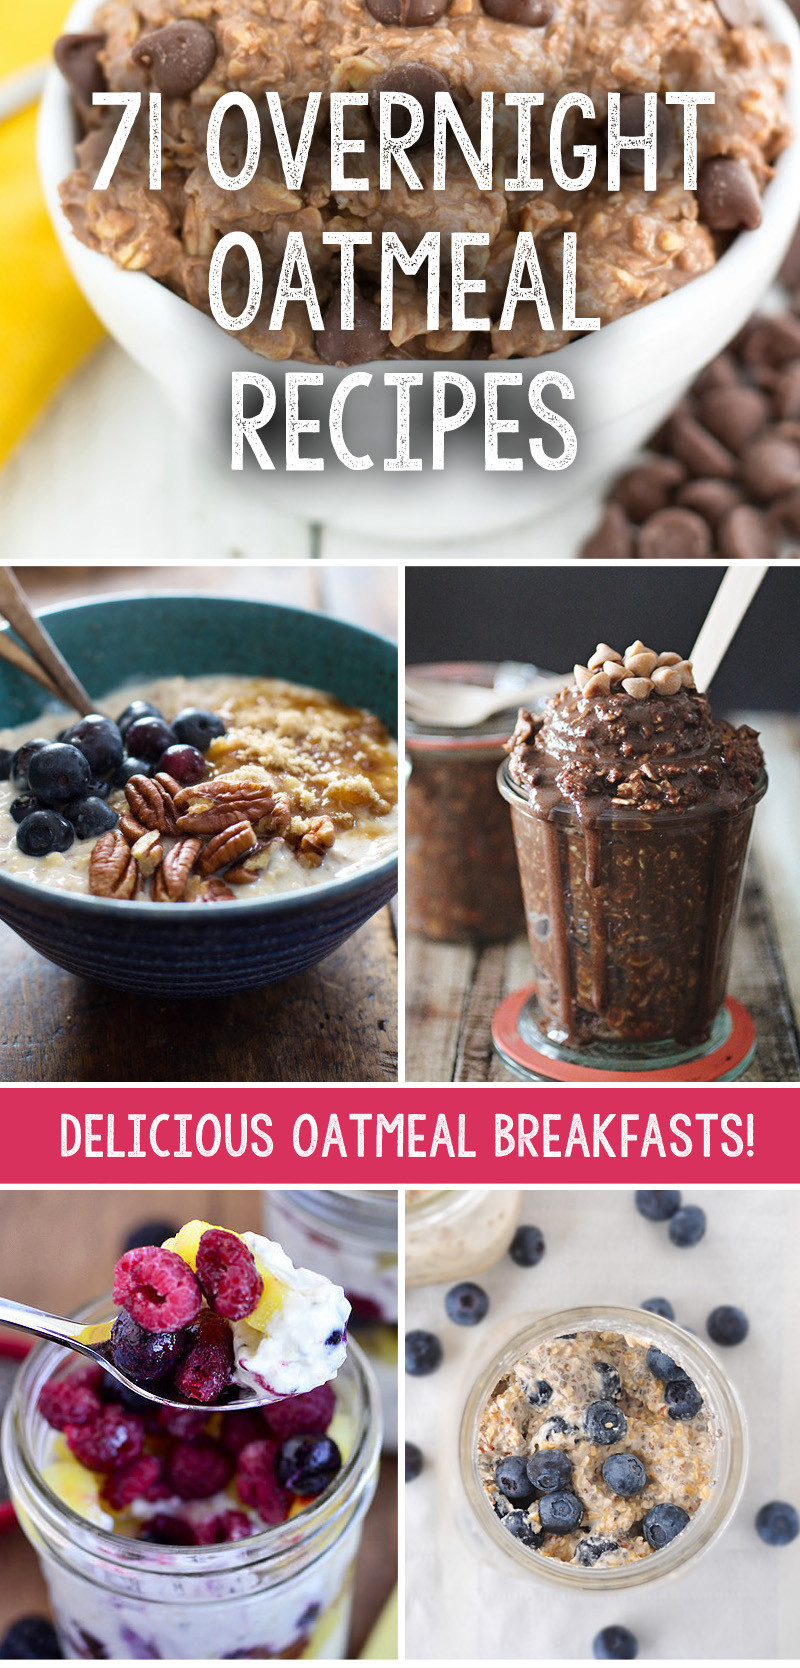 Oat Recipes For Weight Loss
 We have collected 71 incredible overnight oatmeal recipes